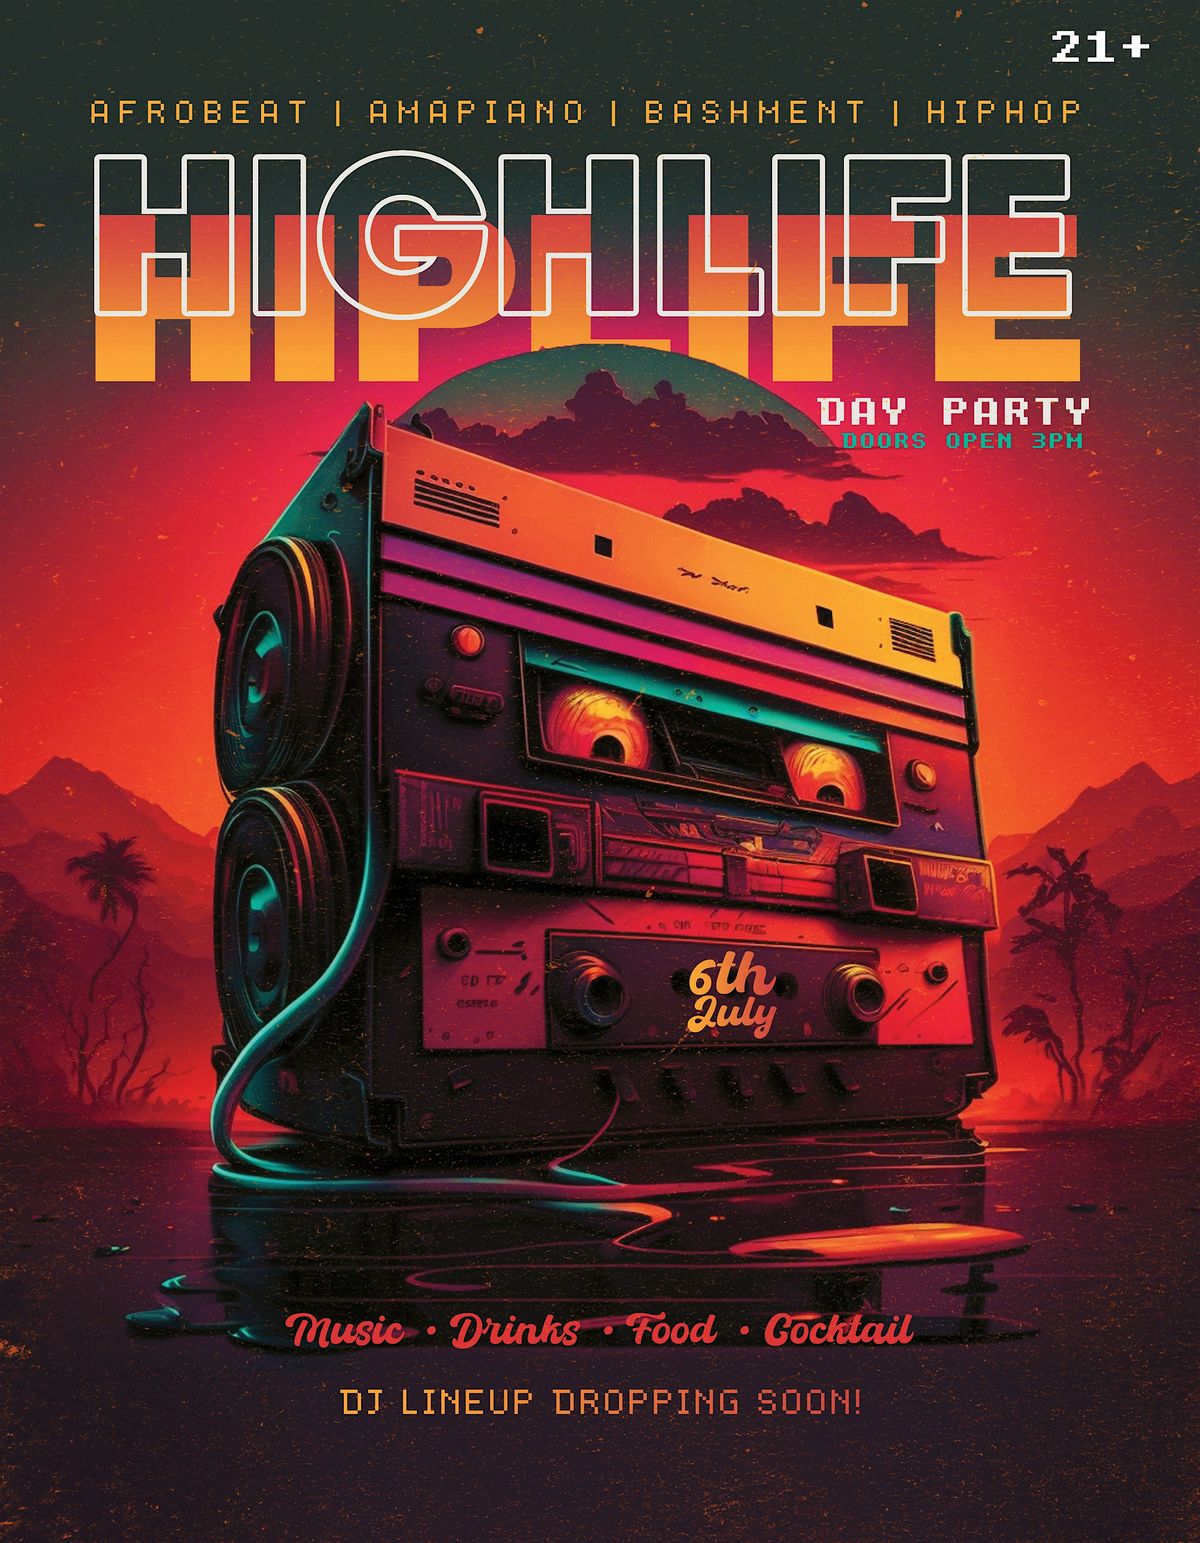 HIGHLIFE DAY PARTY